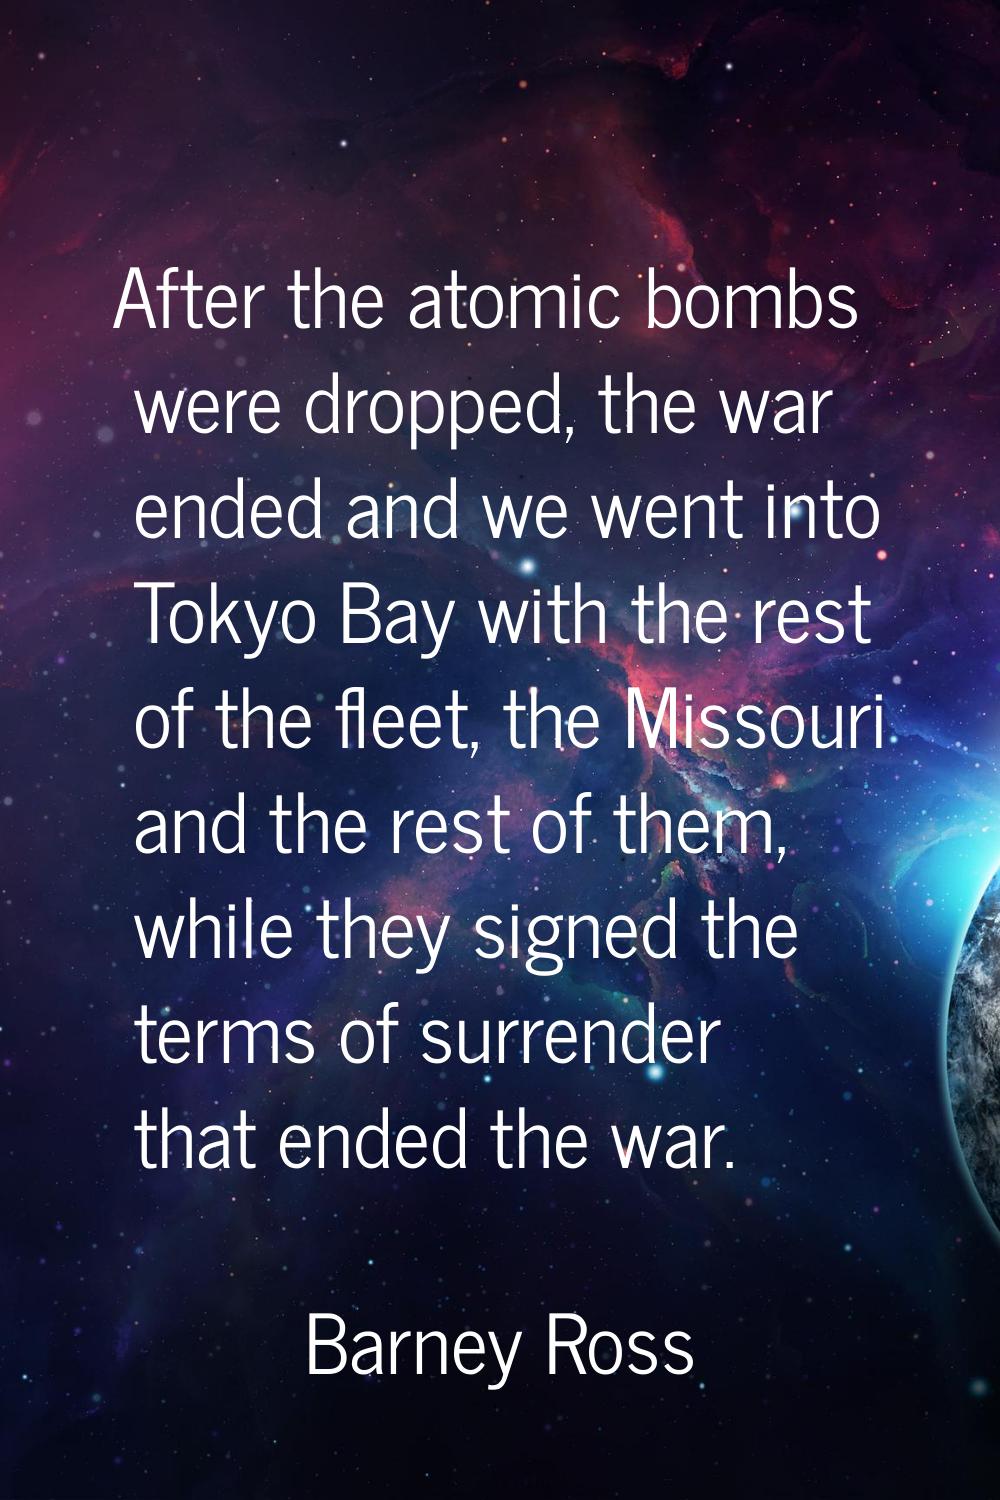 After the atomic bombs were dropped, the war ended and we went into Tokyo Bay with the rest of the 